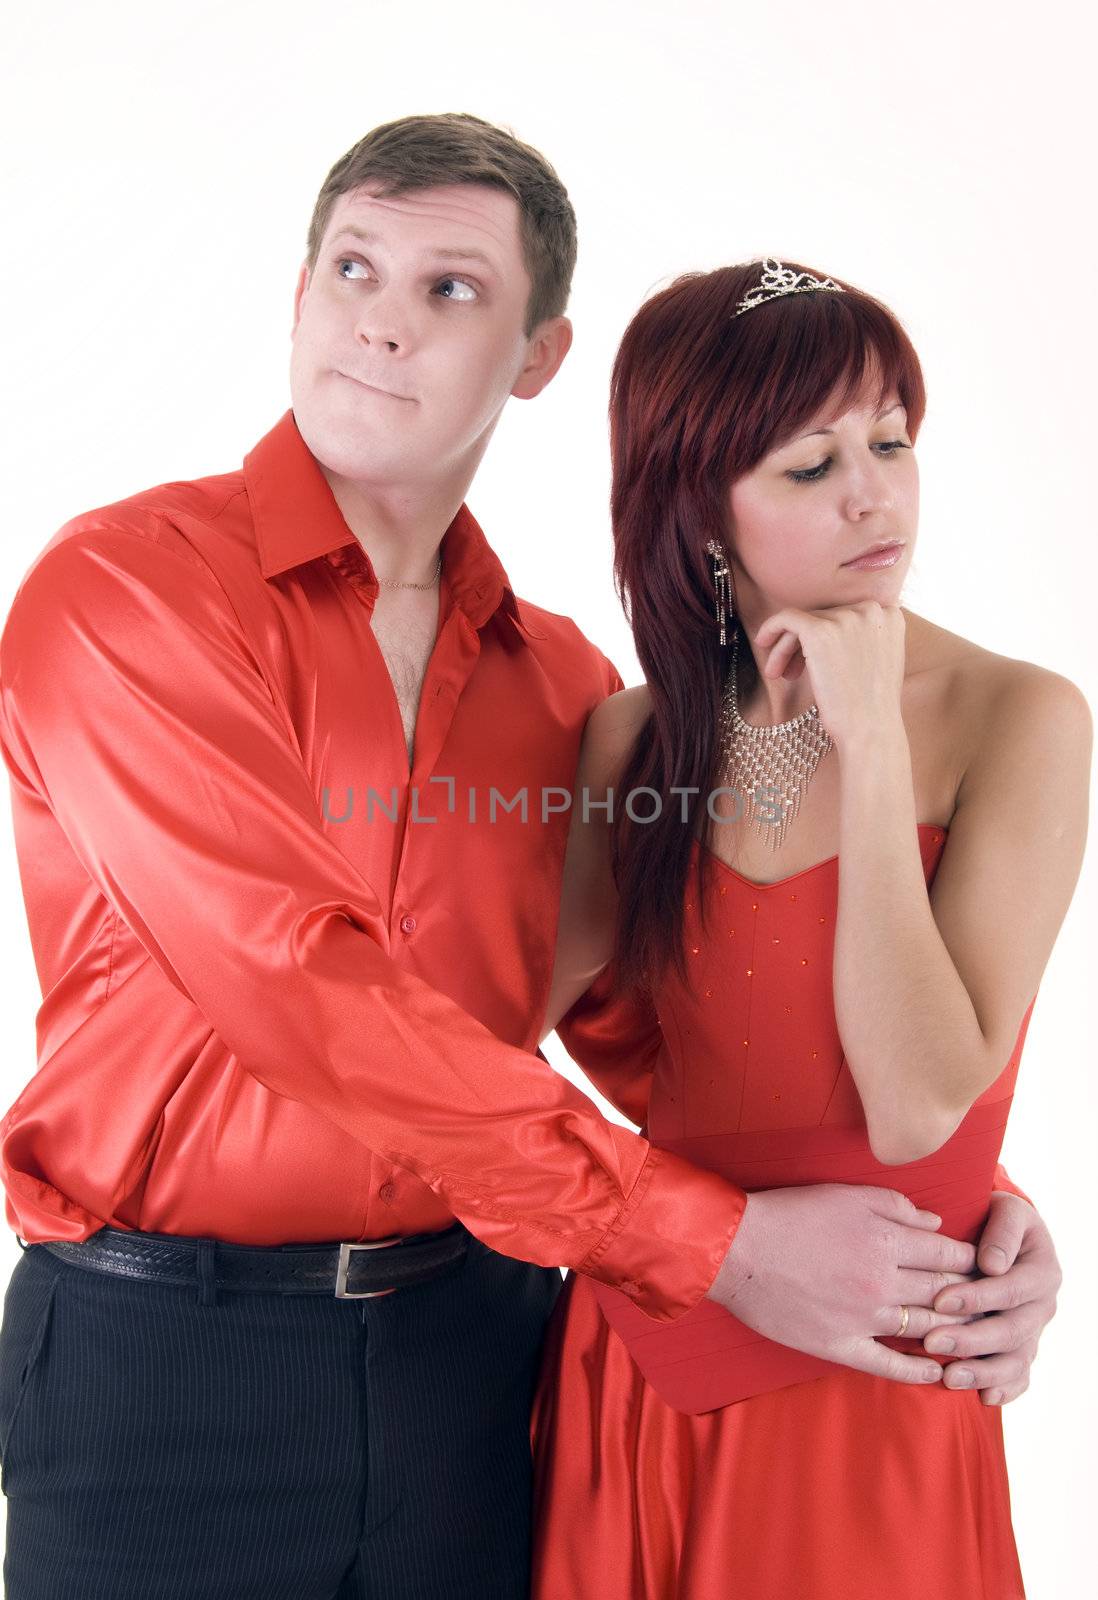 Young couple in red have fallen out